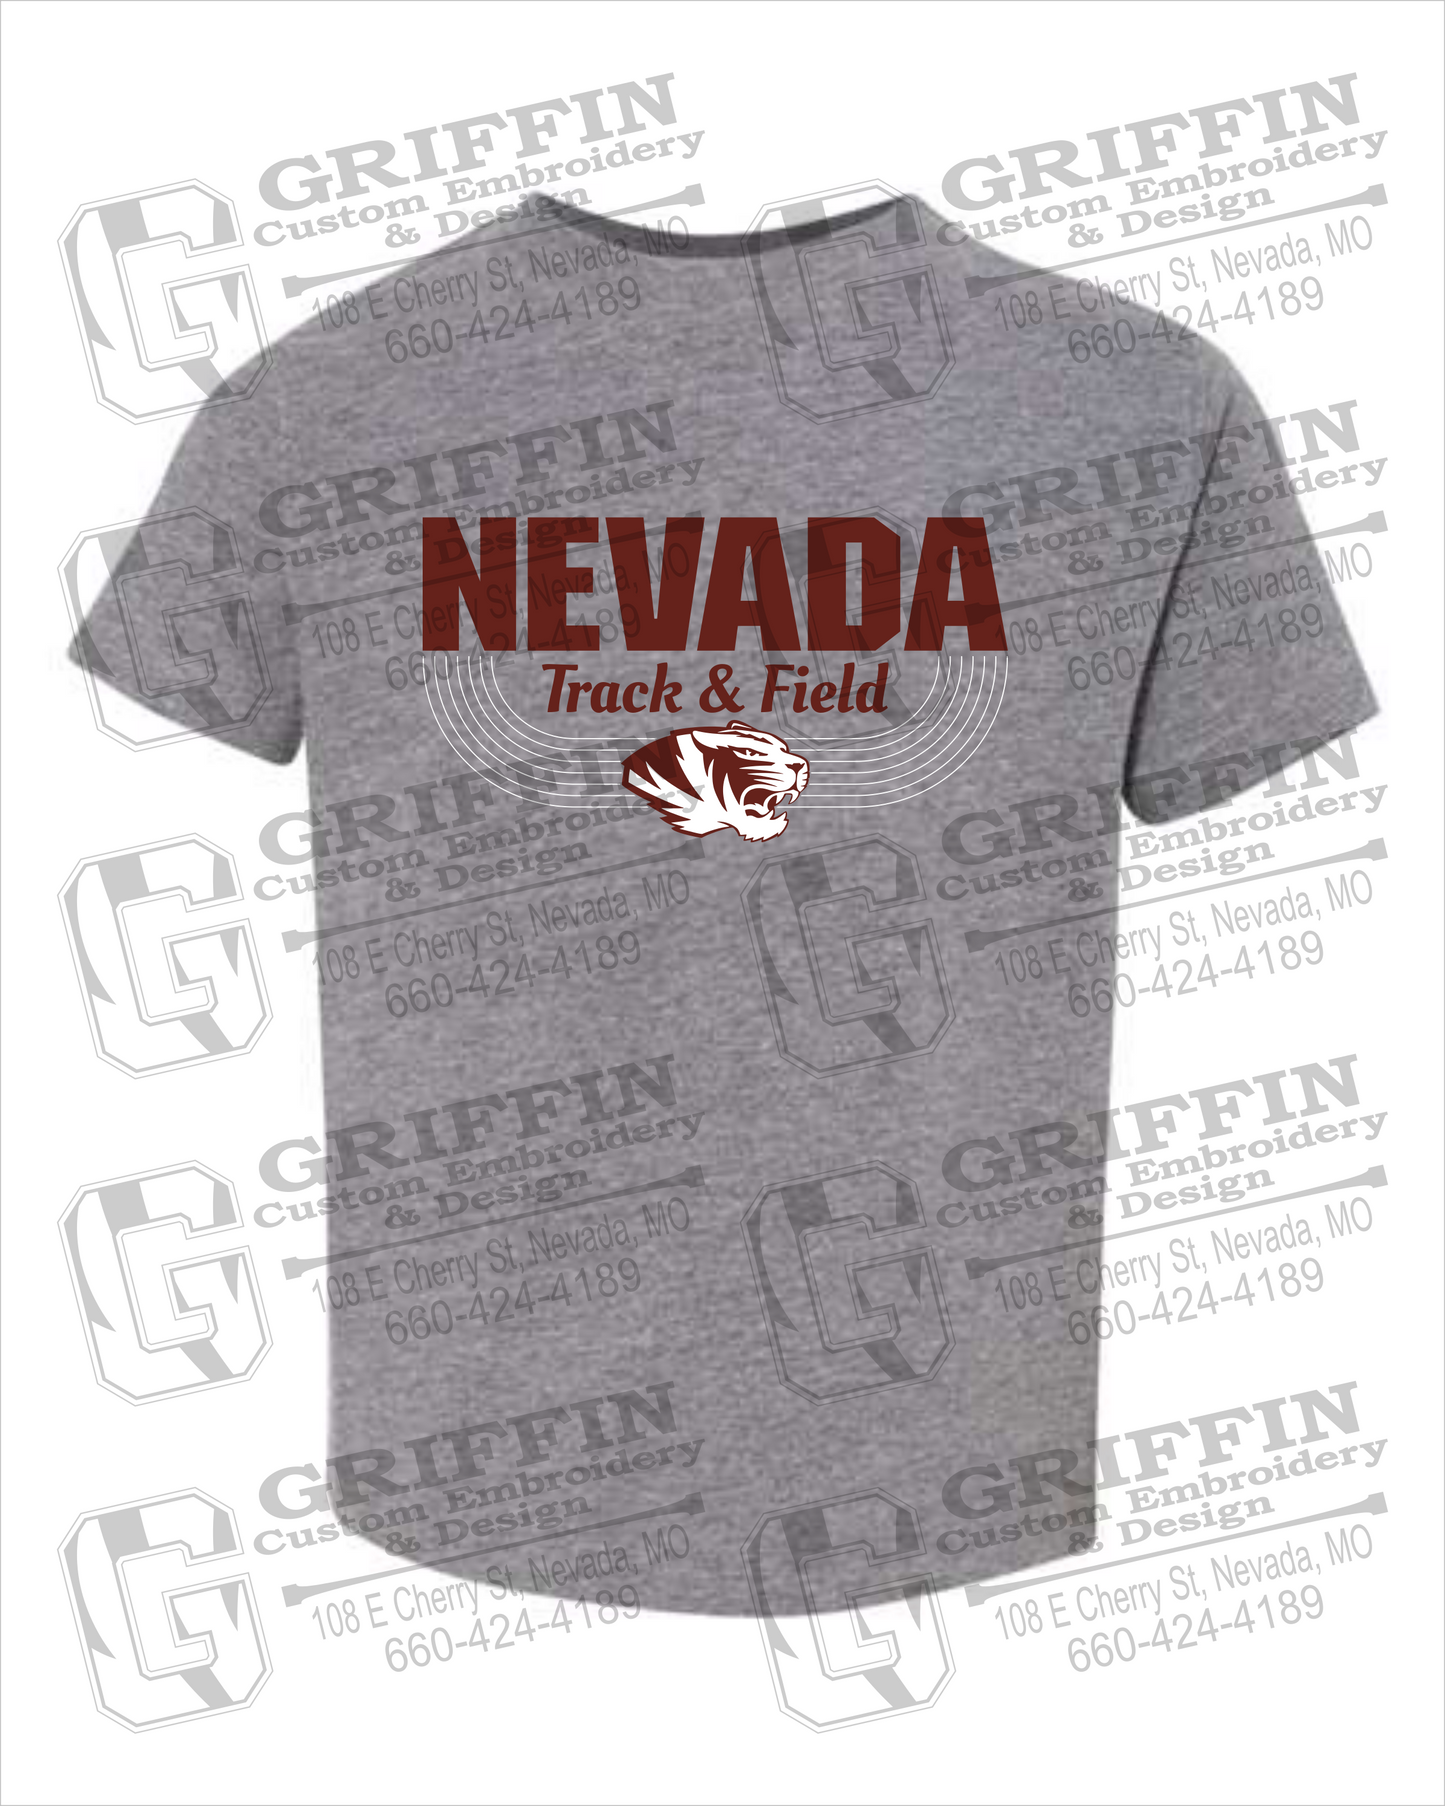 Nevada Tigers 24-R Toddler/Infant T-Shirt - Track & Field